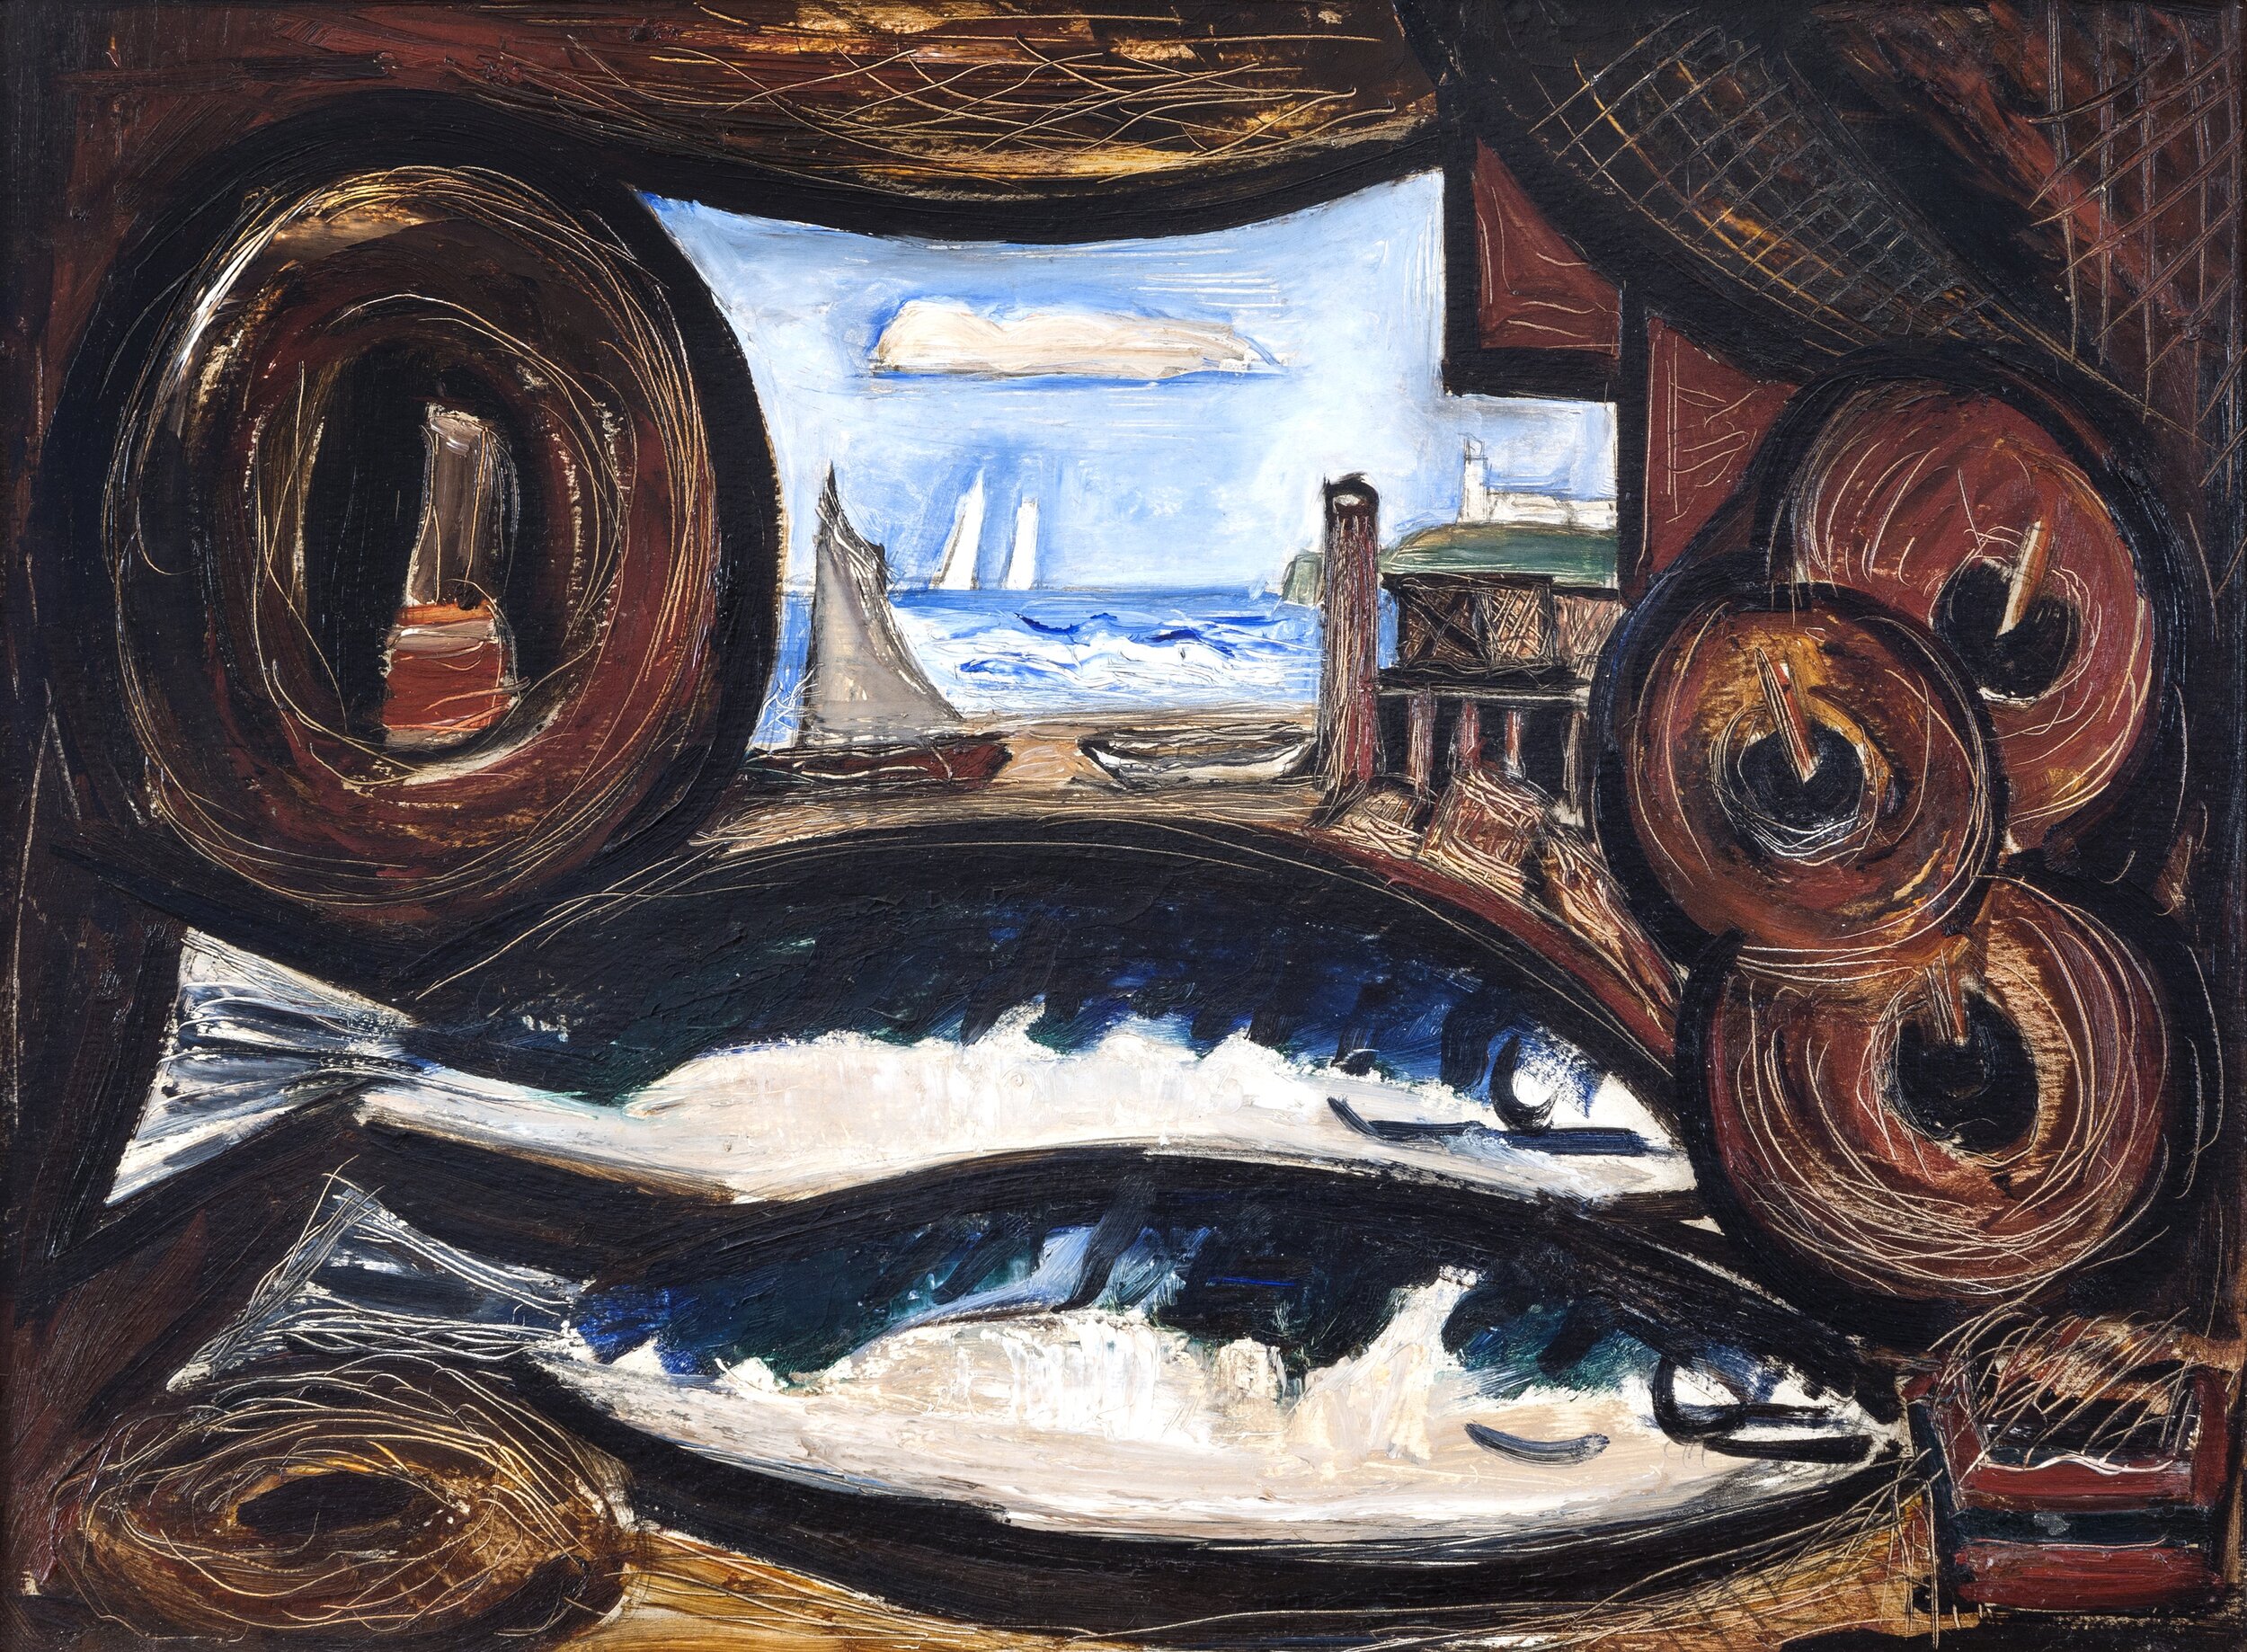 American Modernist Selections # Spring - Summer 2020 &lt;alt="Painting of two fish inside a wooden interior with a window to a seascape with sailboats"&gt;